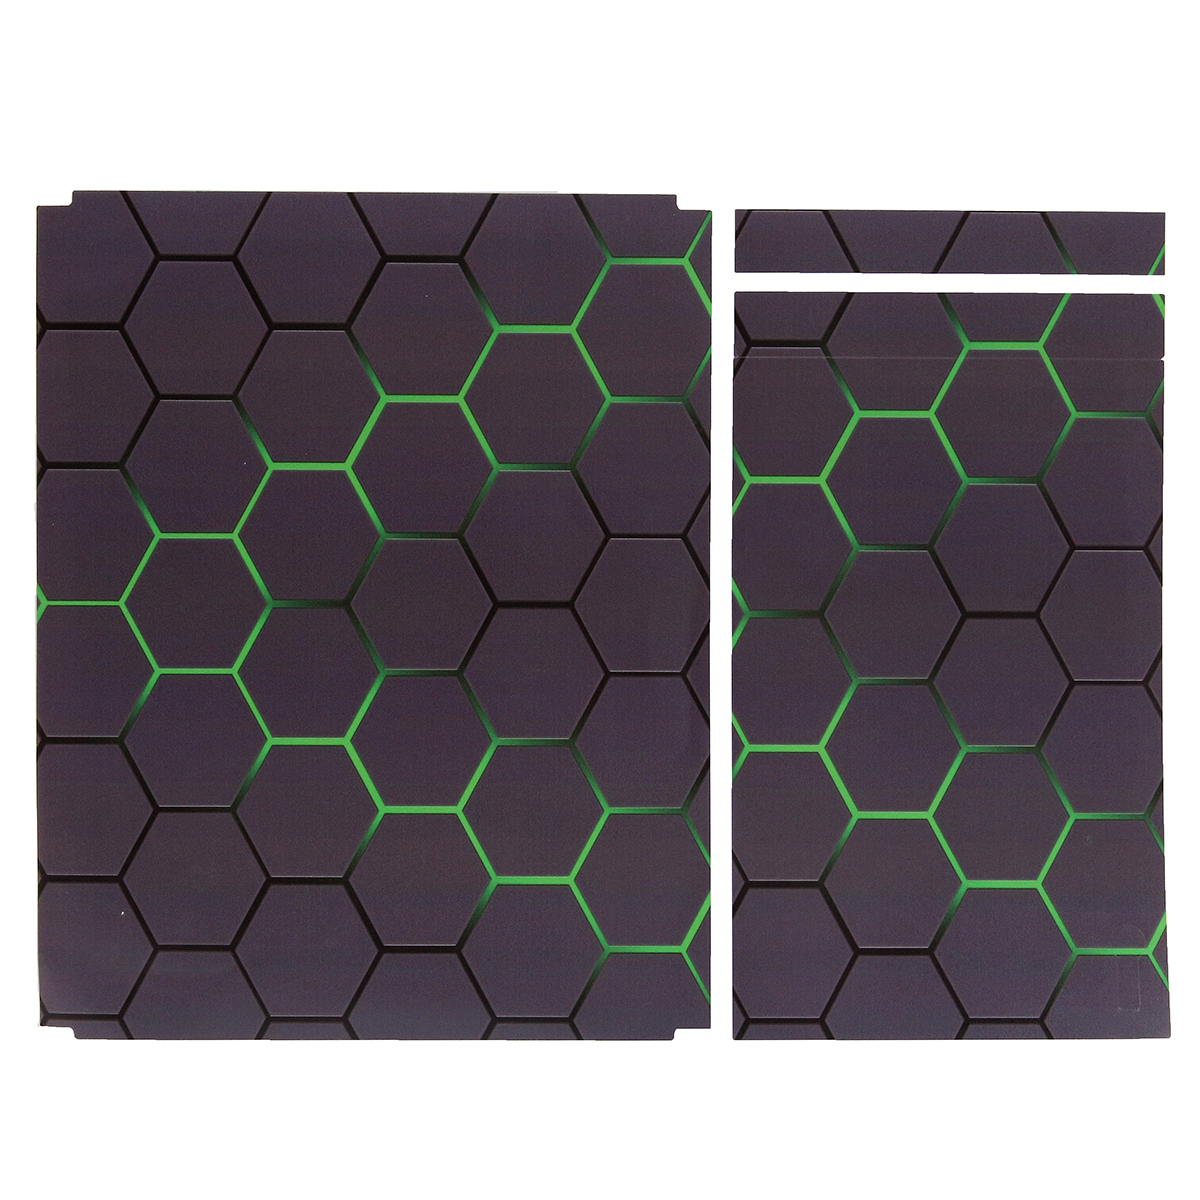 Green Grid Vinyl Decal Skin Stickers Cover for Xbox One S Game Console&2 Controllers 14